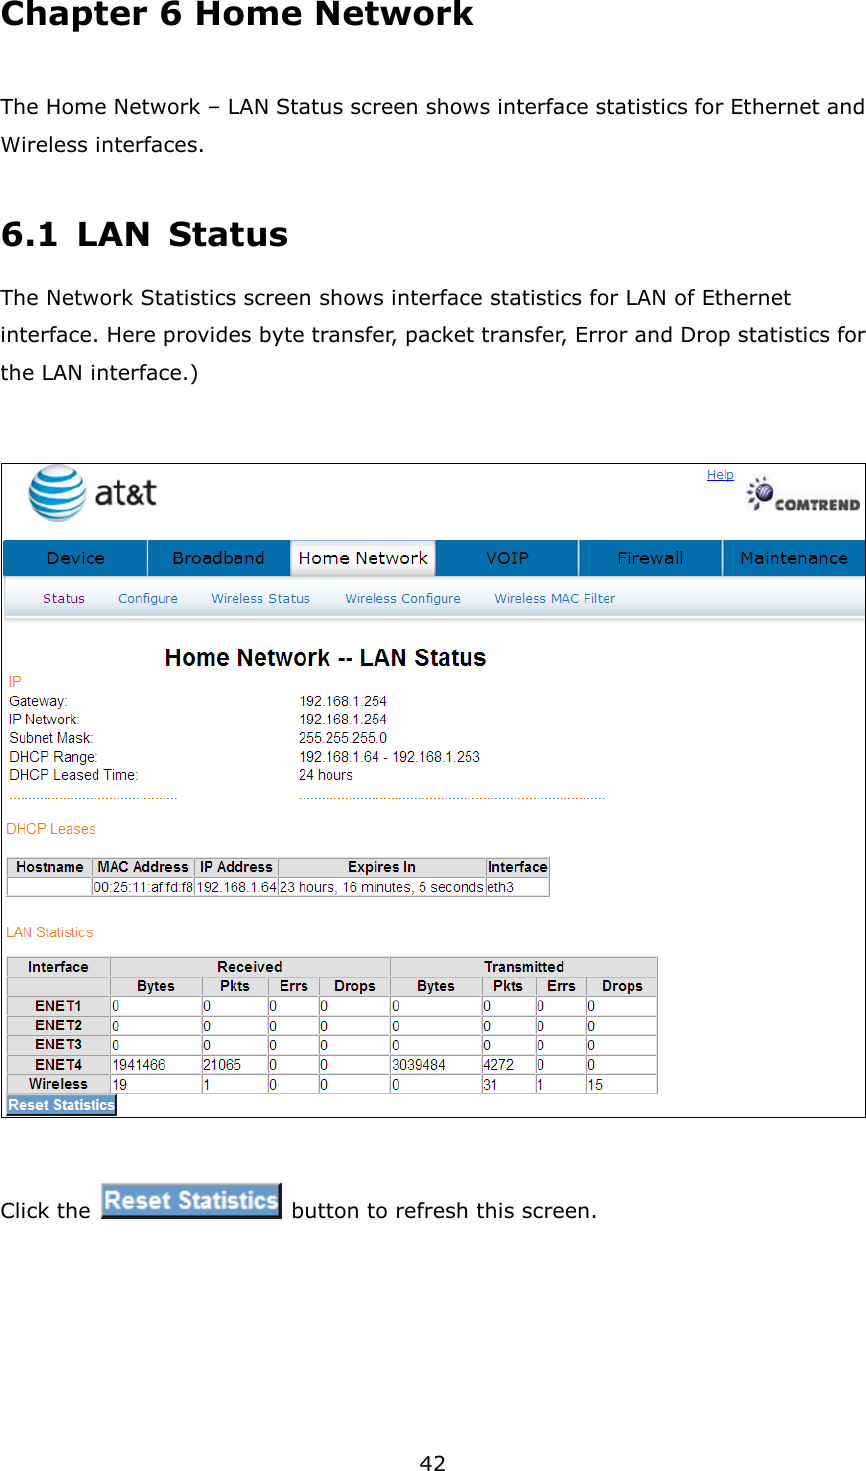 42 Chapter 6 Home Network The Home Network – LAN Status screen shows interface statistics for Ethernet and Wireless interfaces.   6.1  LAN  Status The Network Statistics screen shows interface statistics for LAN of Ethernet interface. Here provides byte transfer, packet transfer, Error and Drop statistics for the LAN interface.)    Click the    button to refresh this screen.     